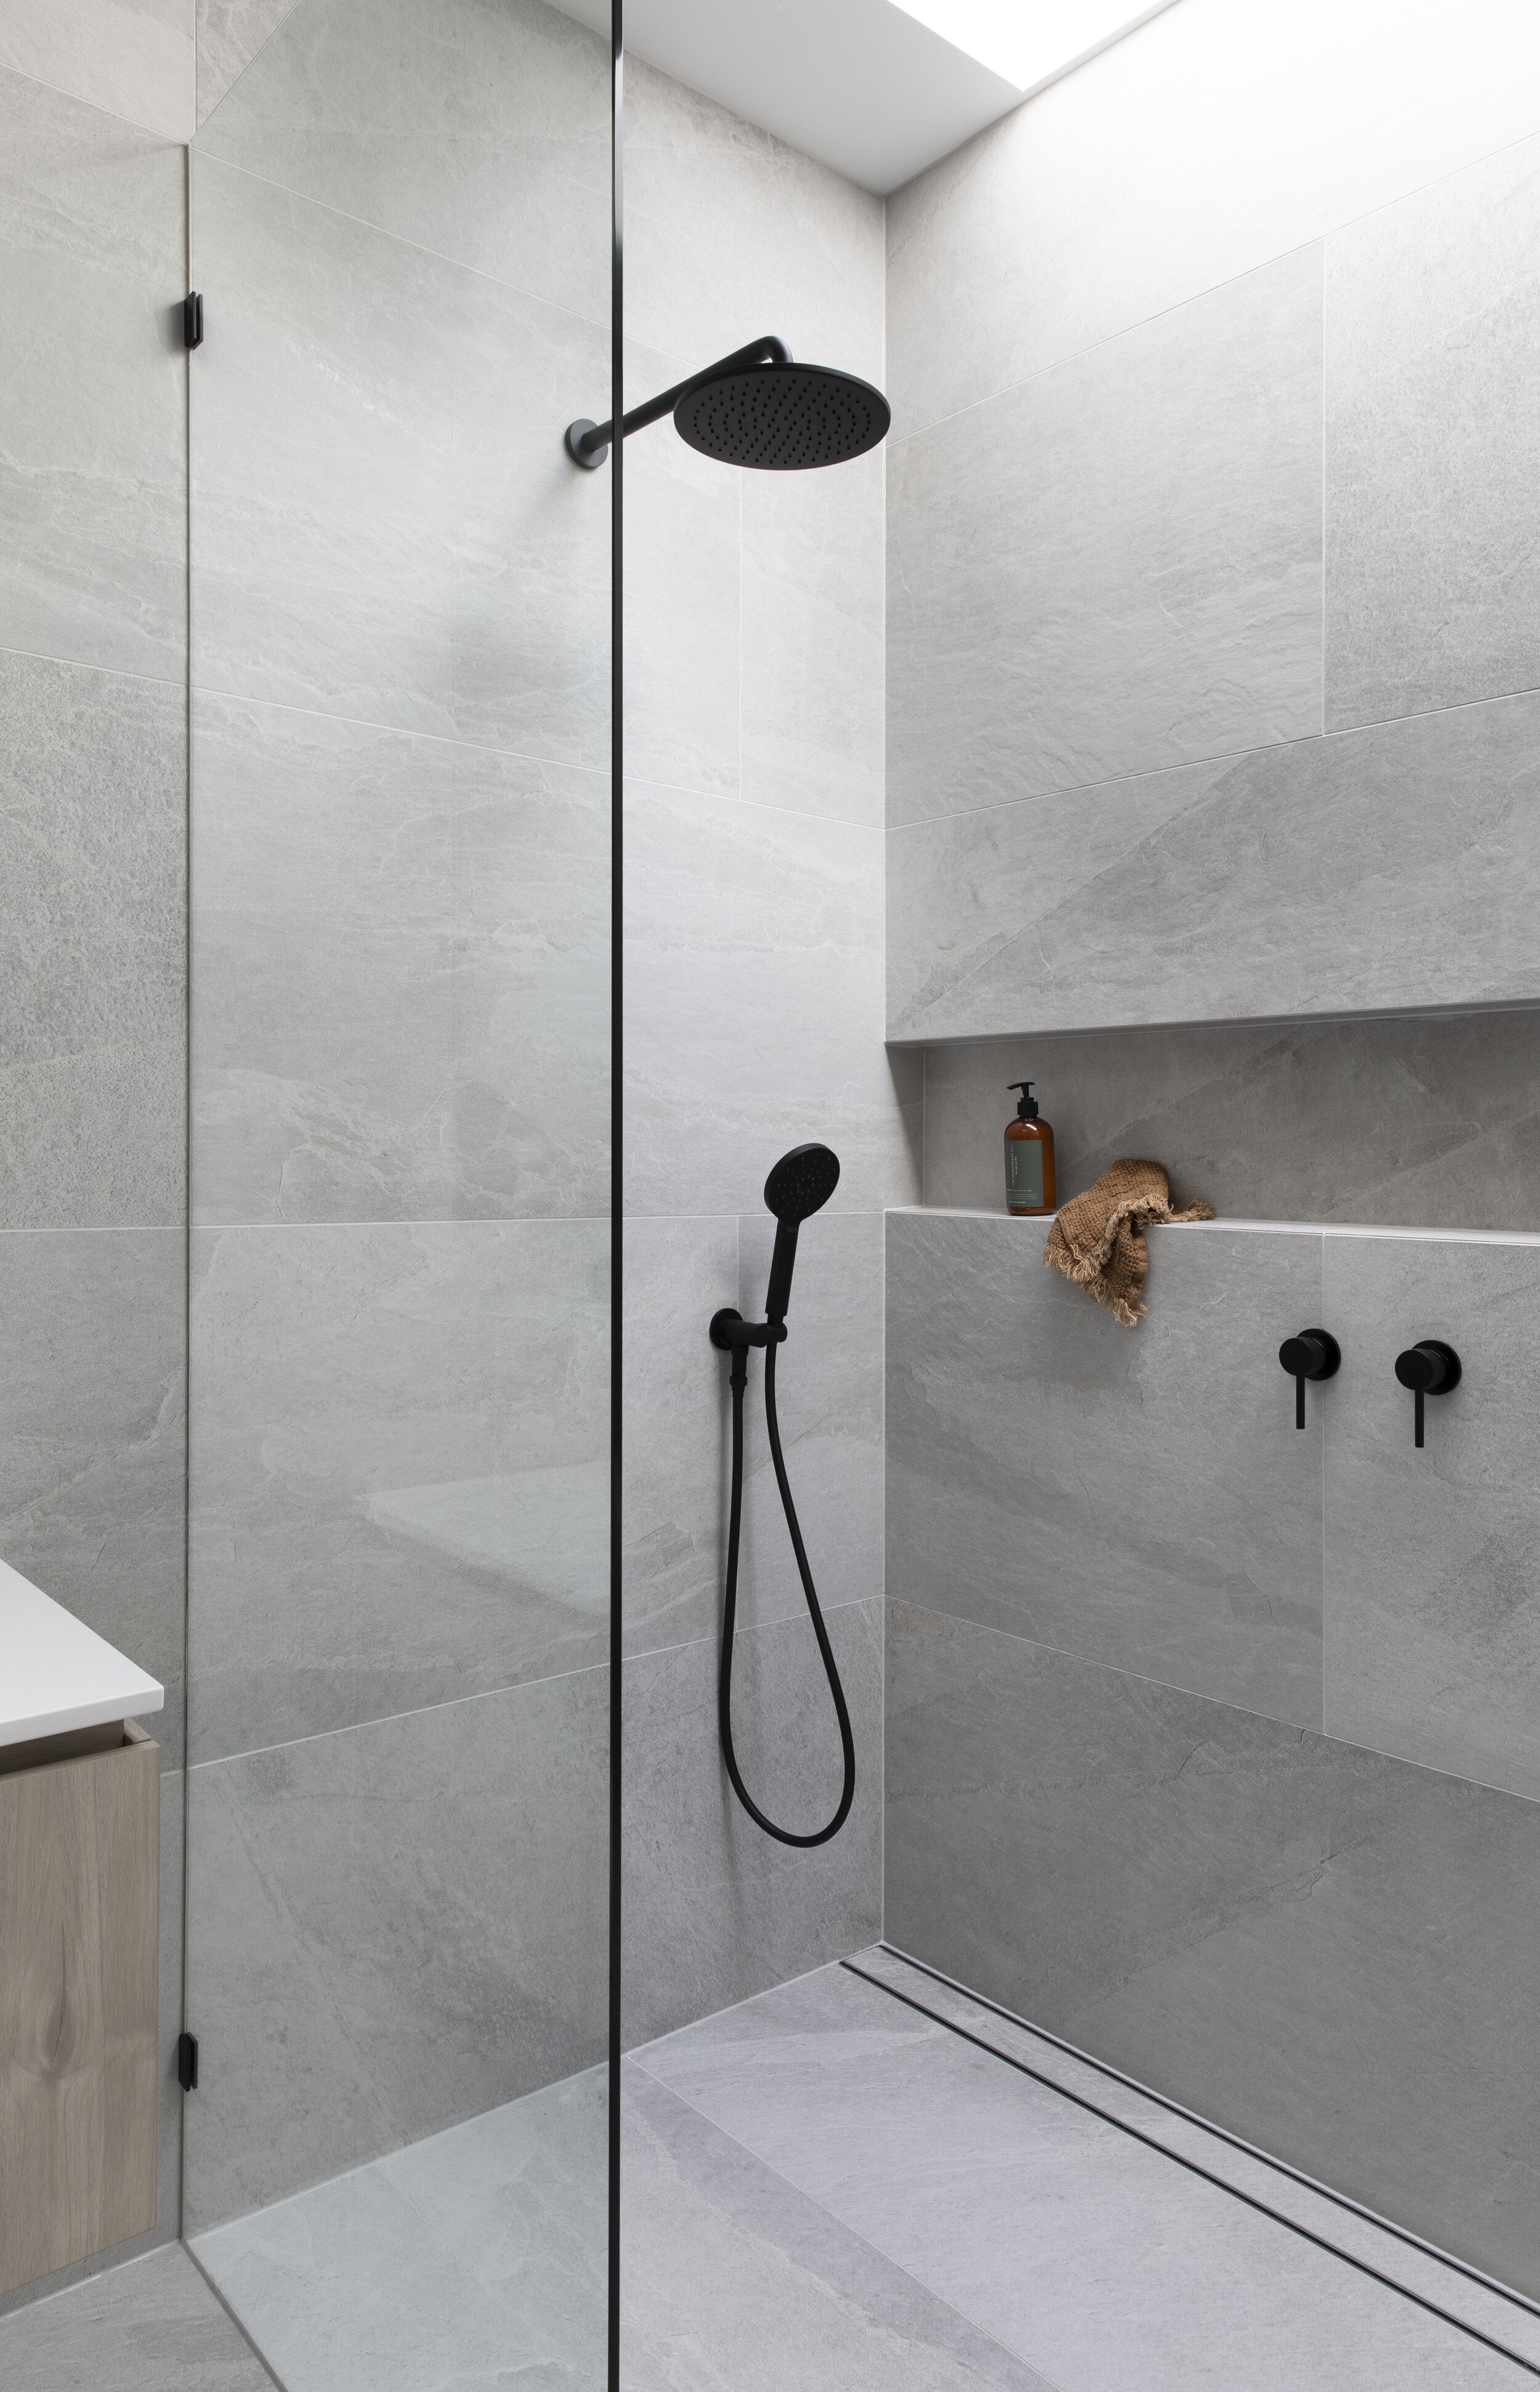 Can I Use Large Tiles In A Shower, Tiled Showers Photos